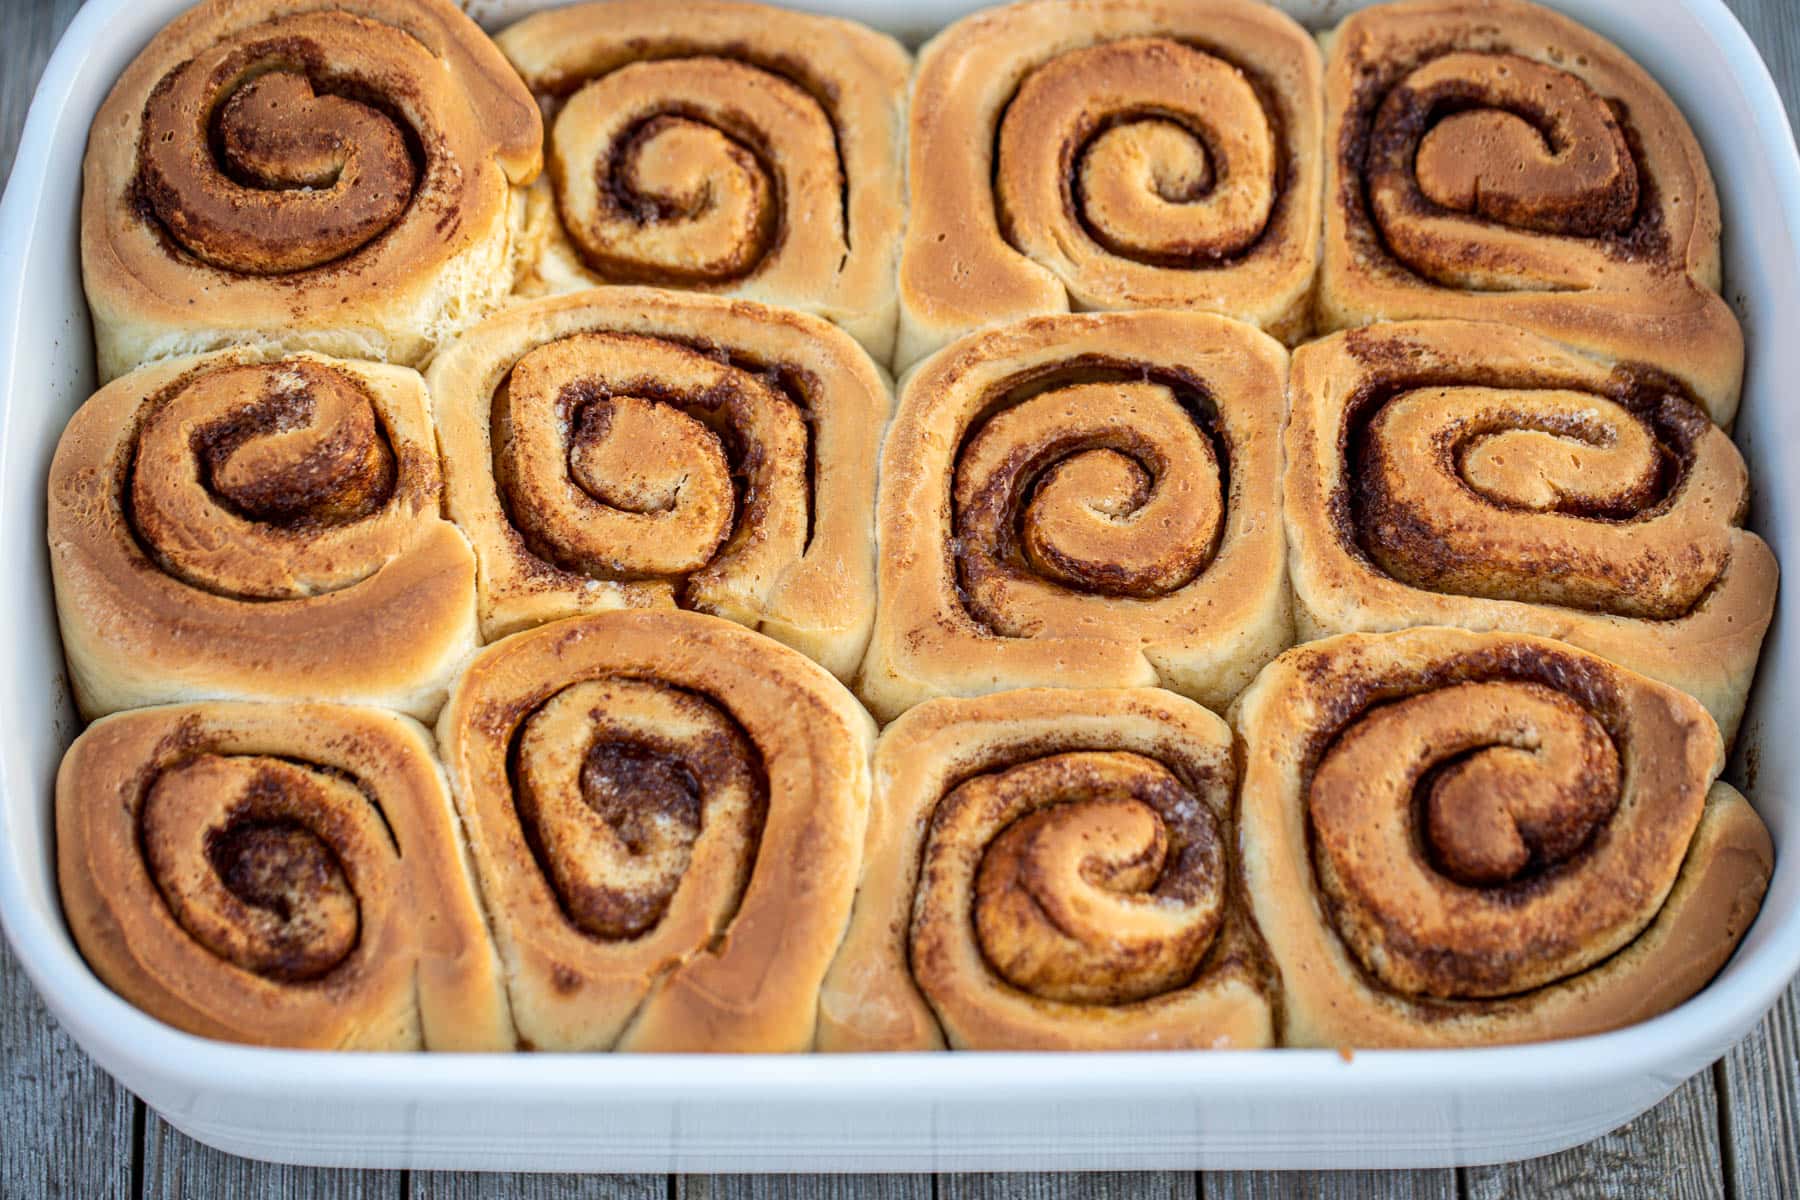 Landscape picture of baked cinnamon rolls